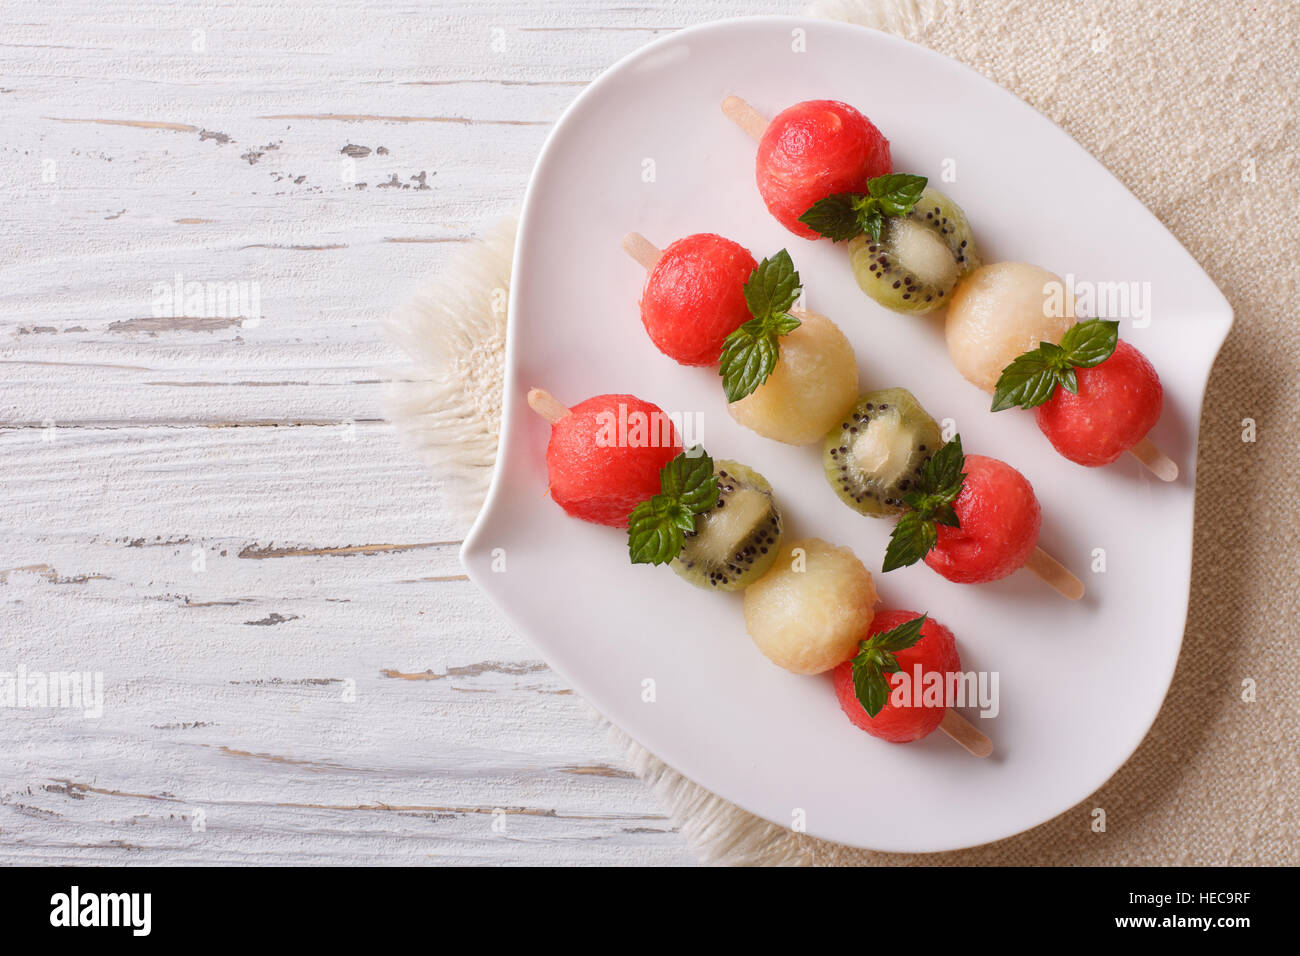 Fruit skewers with balls of watermelon, kiwi and melon on a plate. Horizontal top view Stock Photo